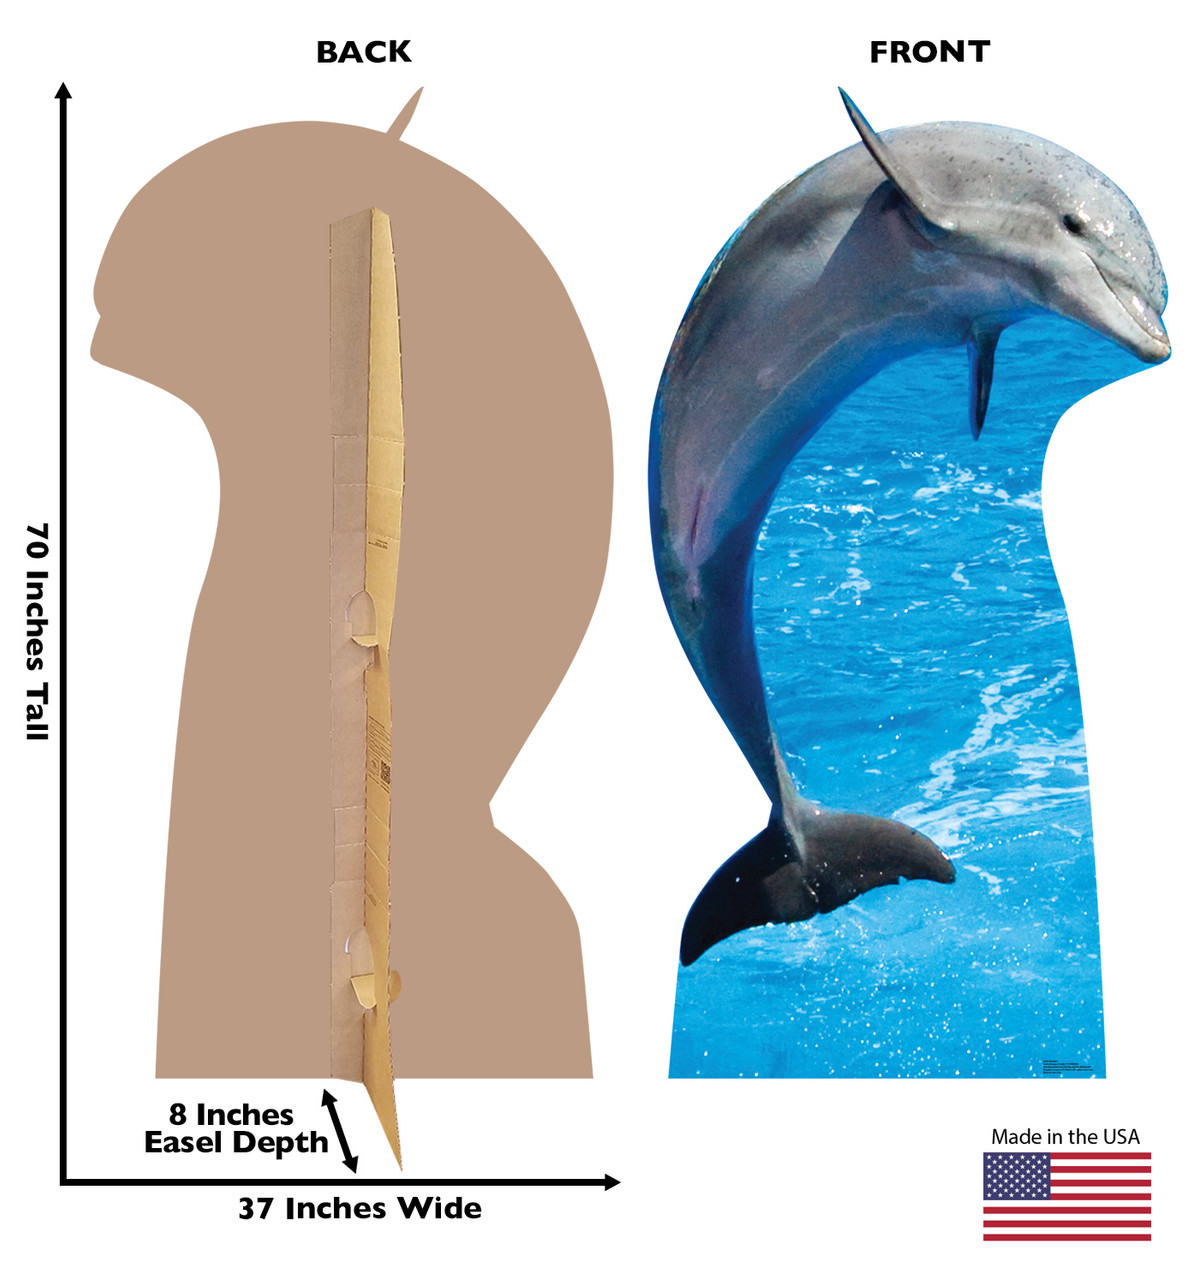 Life-size cardboard standee of a Dolphin with back and front dimensions.